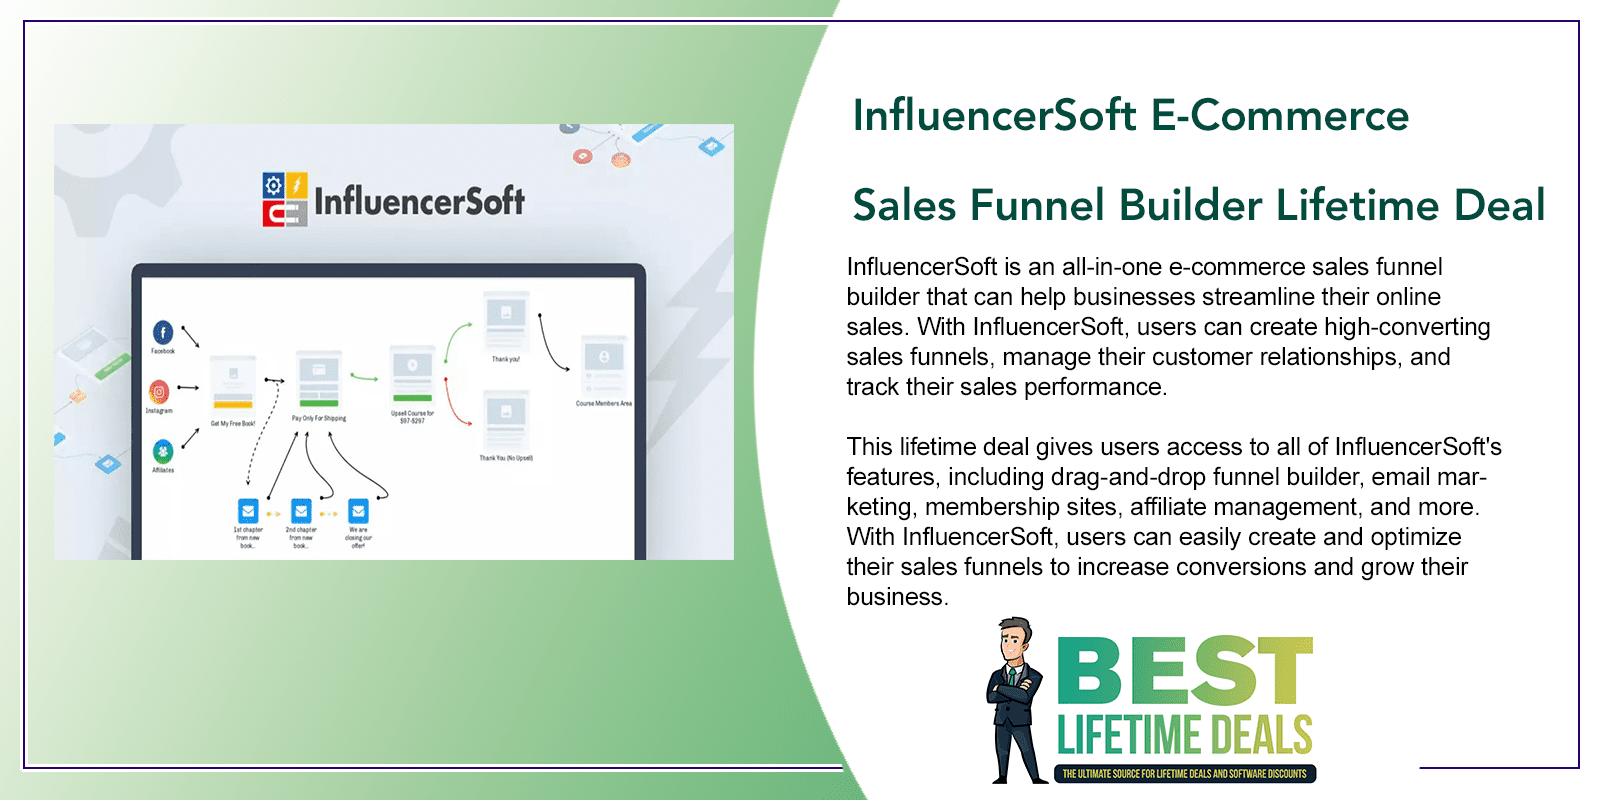 IInfluencerSoft E Commerce Sales Funnel Builder Featured Image